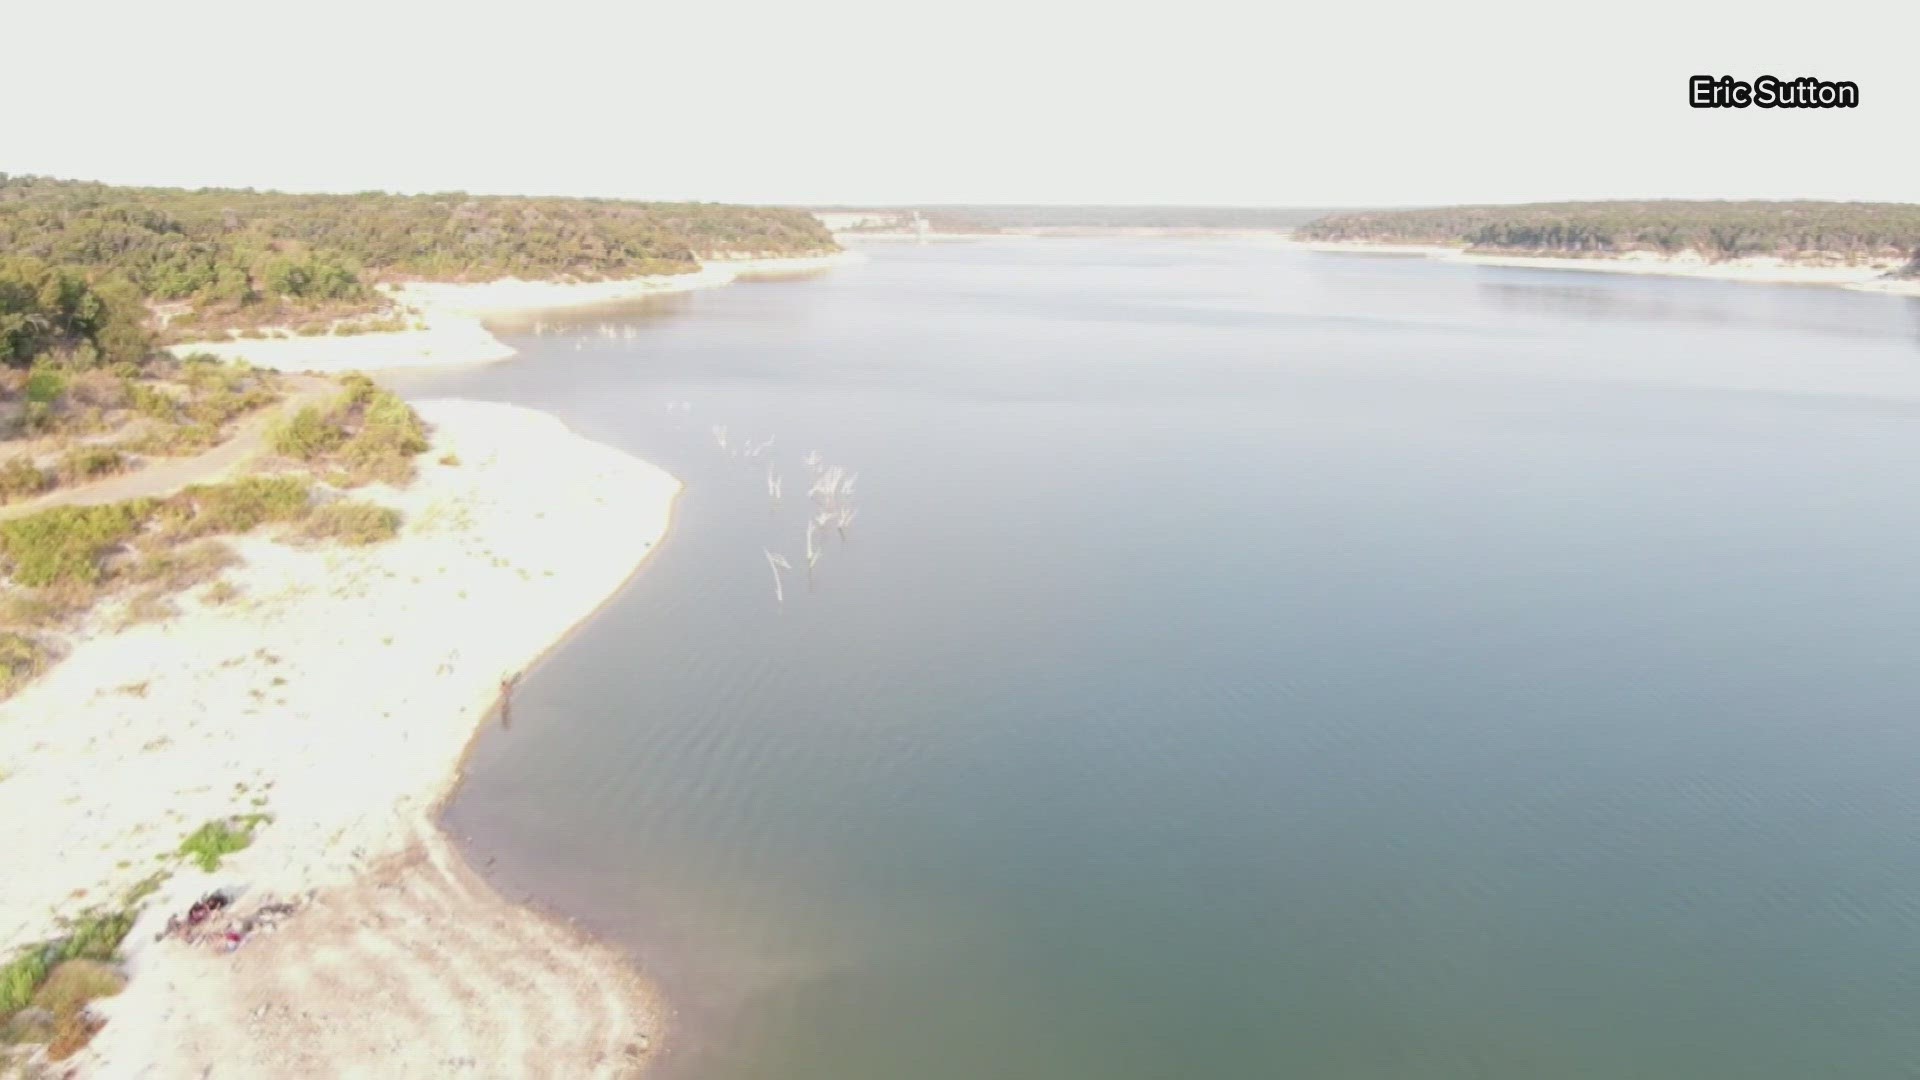 The summer's severe drought has caused extremely low lake levels across Central Texas.